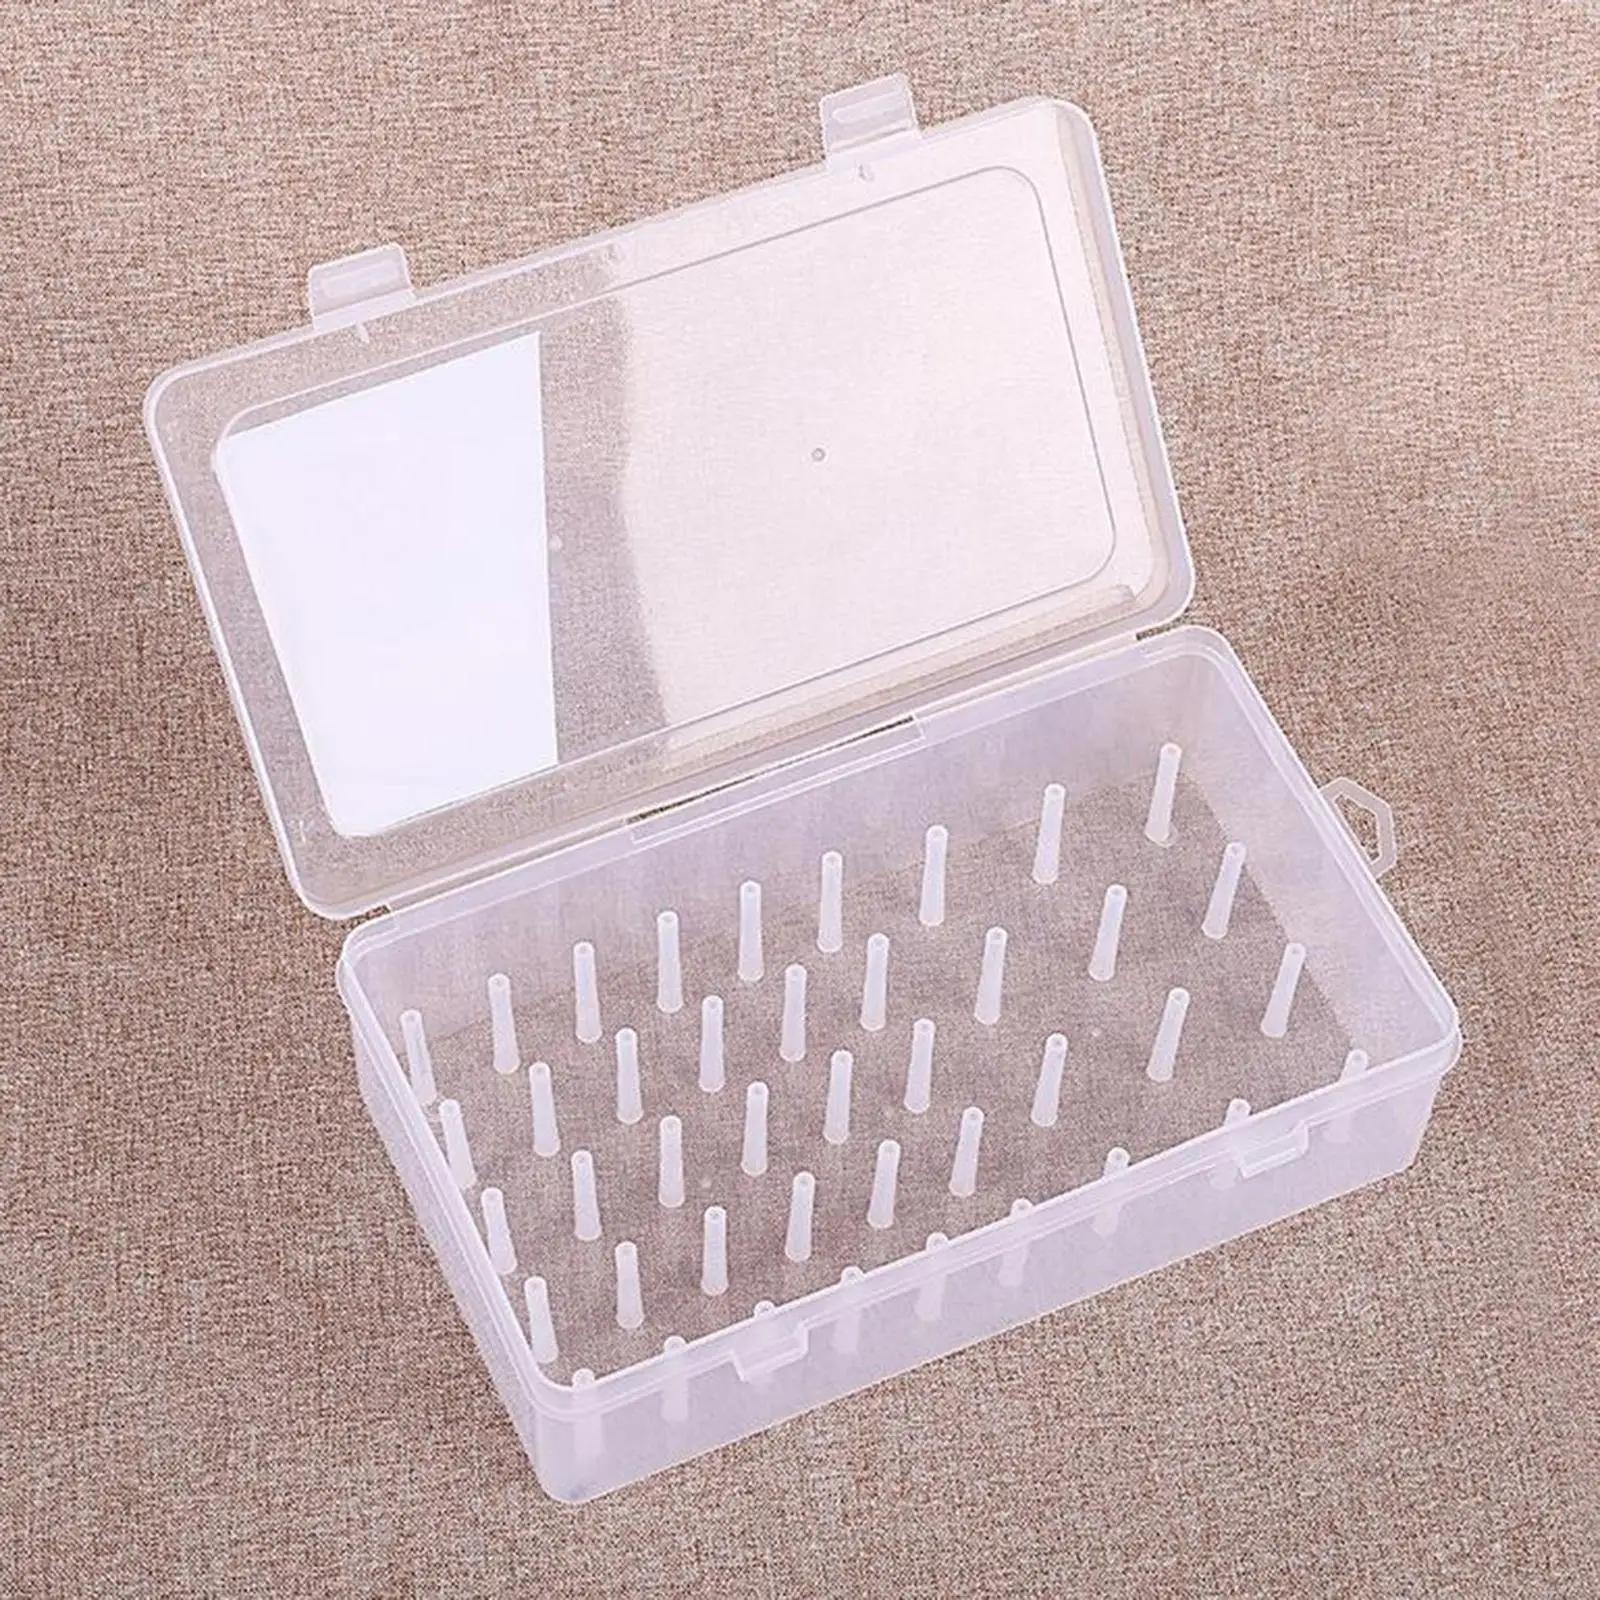 Plastic Bobbins Storage Box Embroidery Sewing Craft Thread Spools Container Empty Case Holder